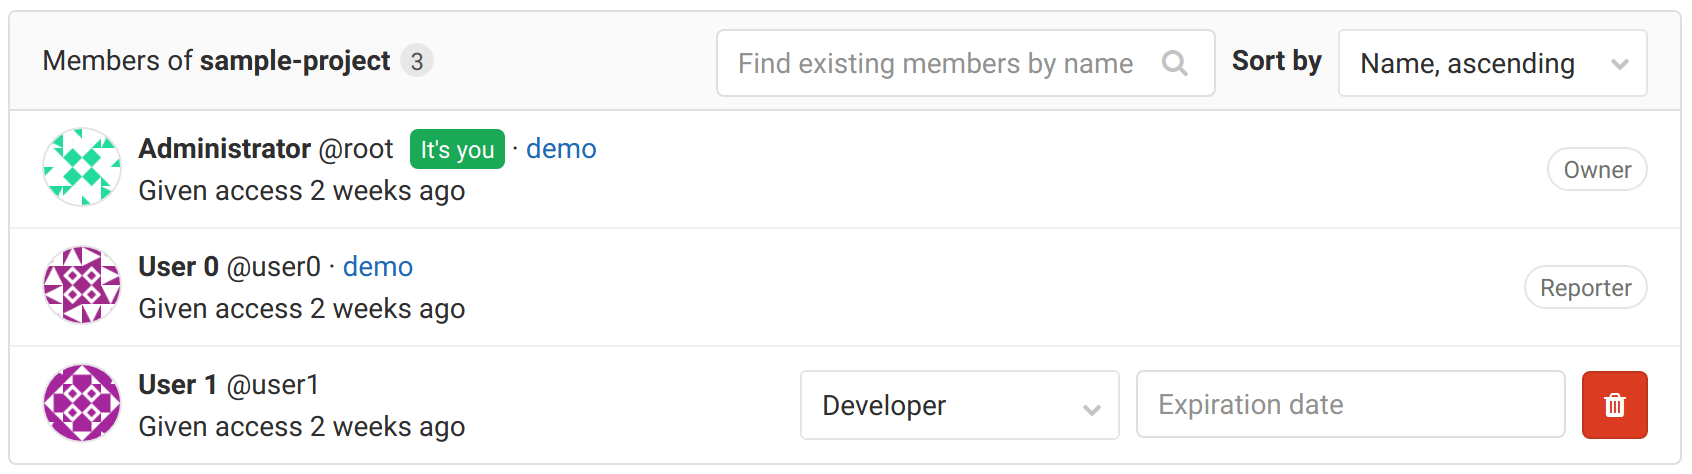 Project members page